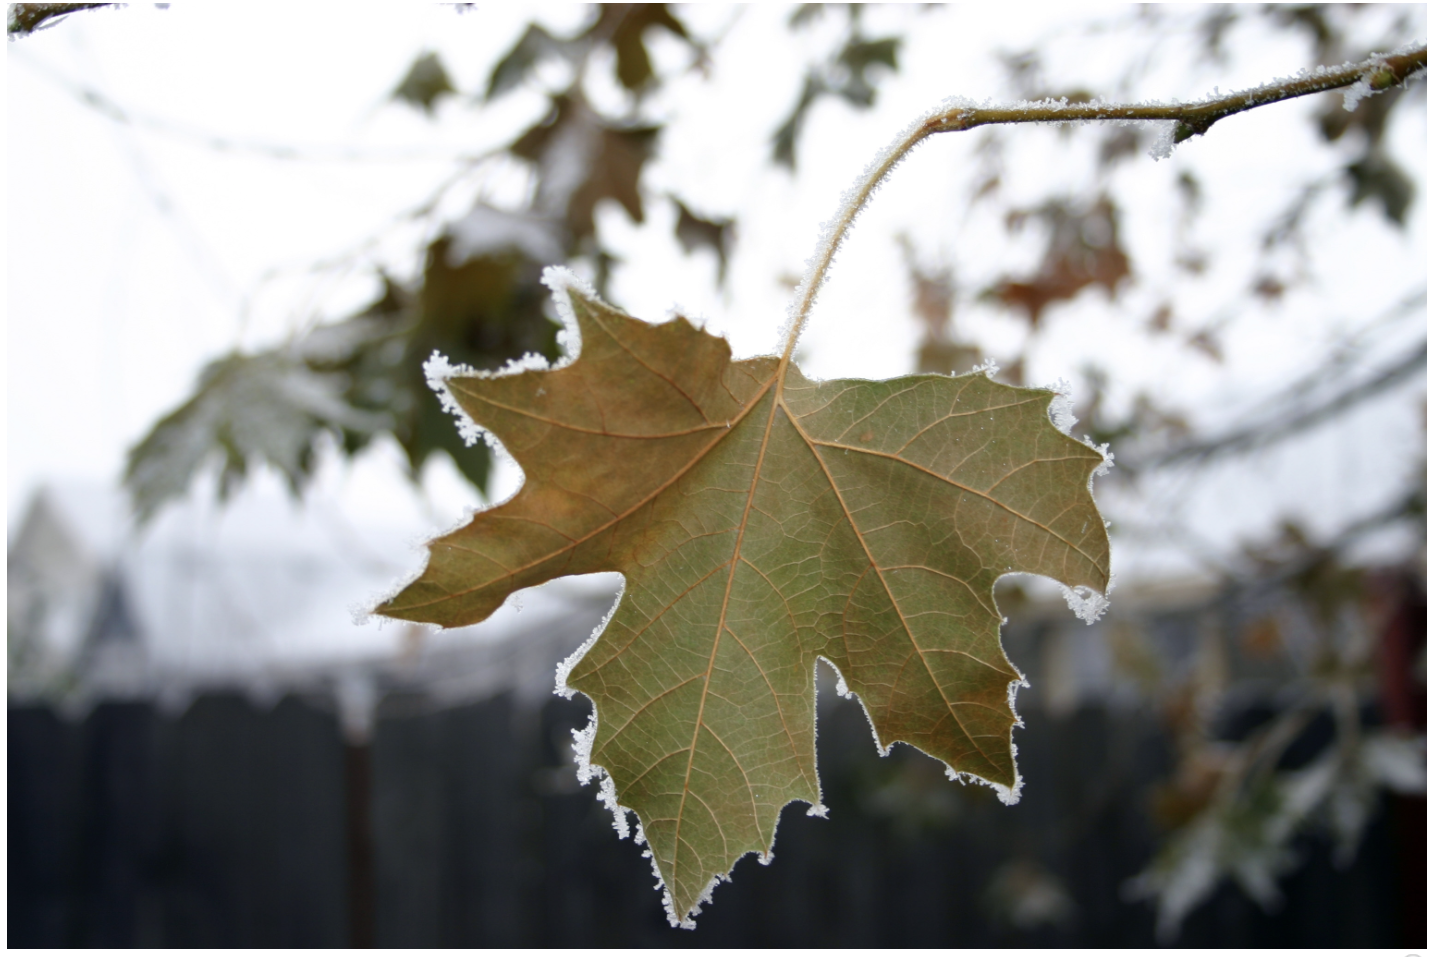 Sycamore leaf with hoary frost